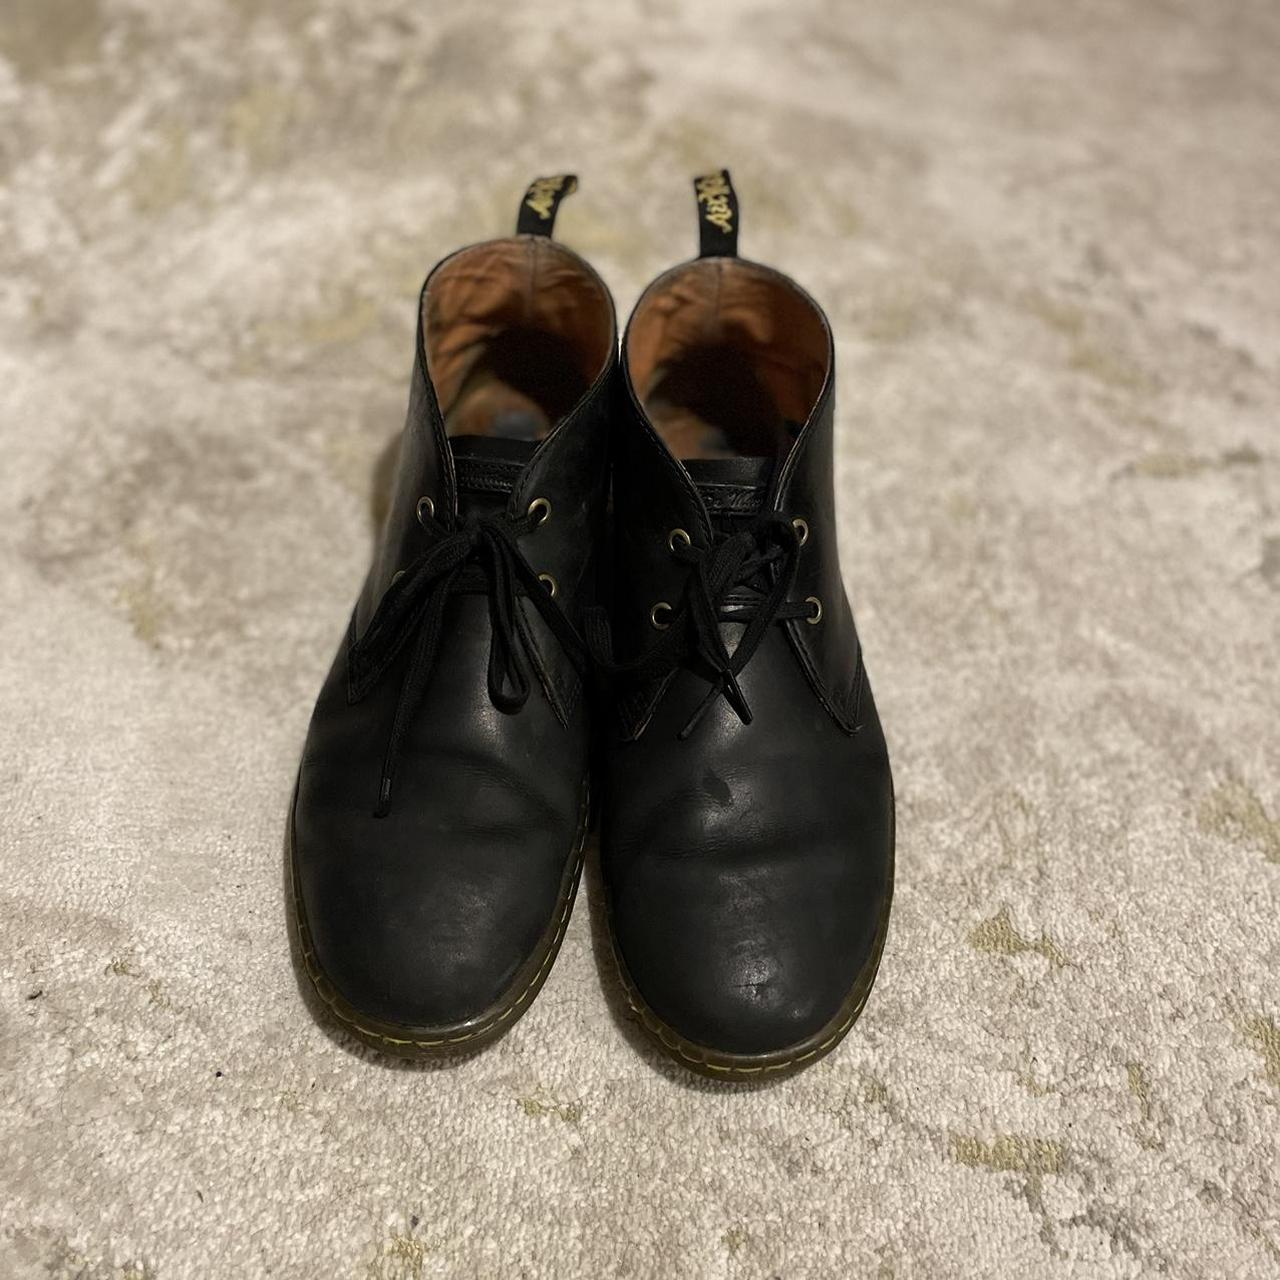 Dr.Martens men’s Cabrillo leather shoes, worn but in... - Depop